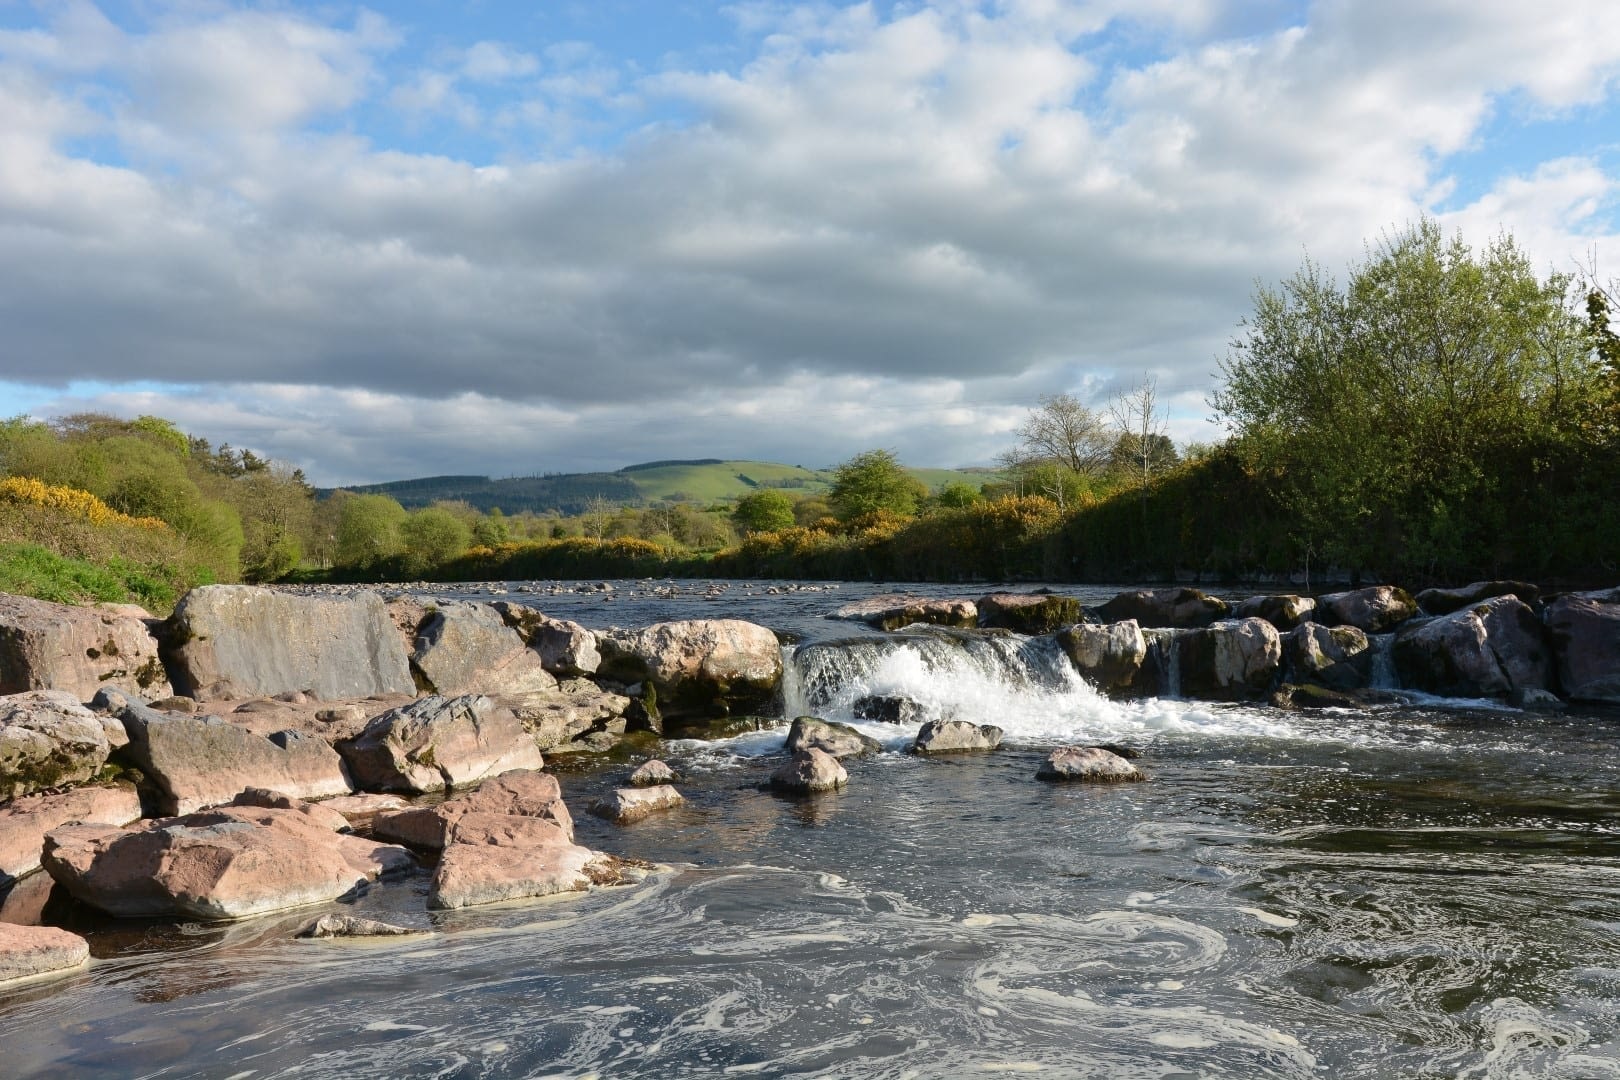 The Tywi river